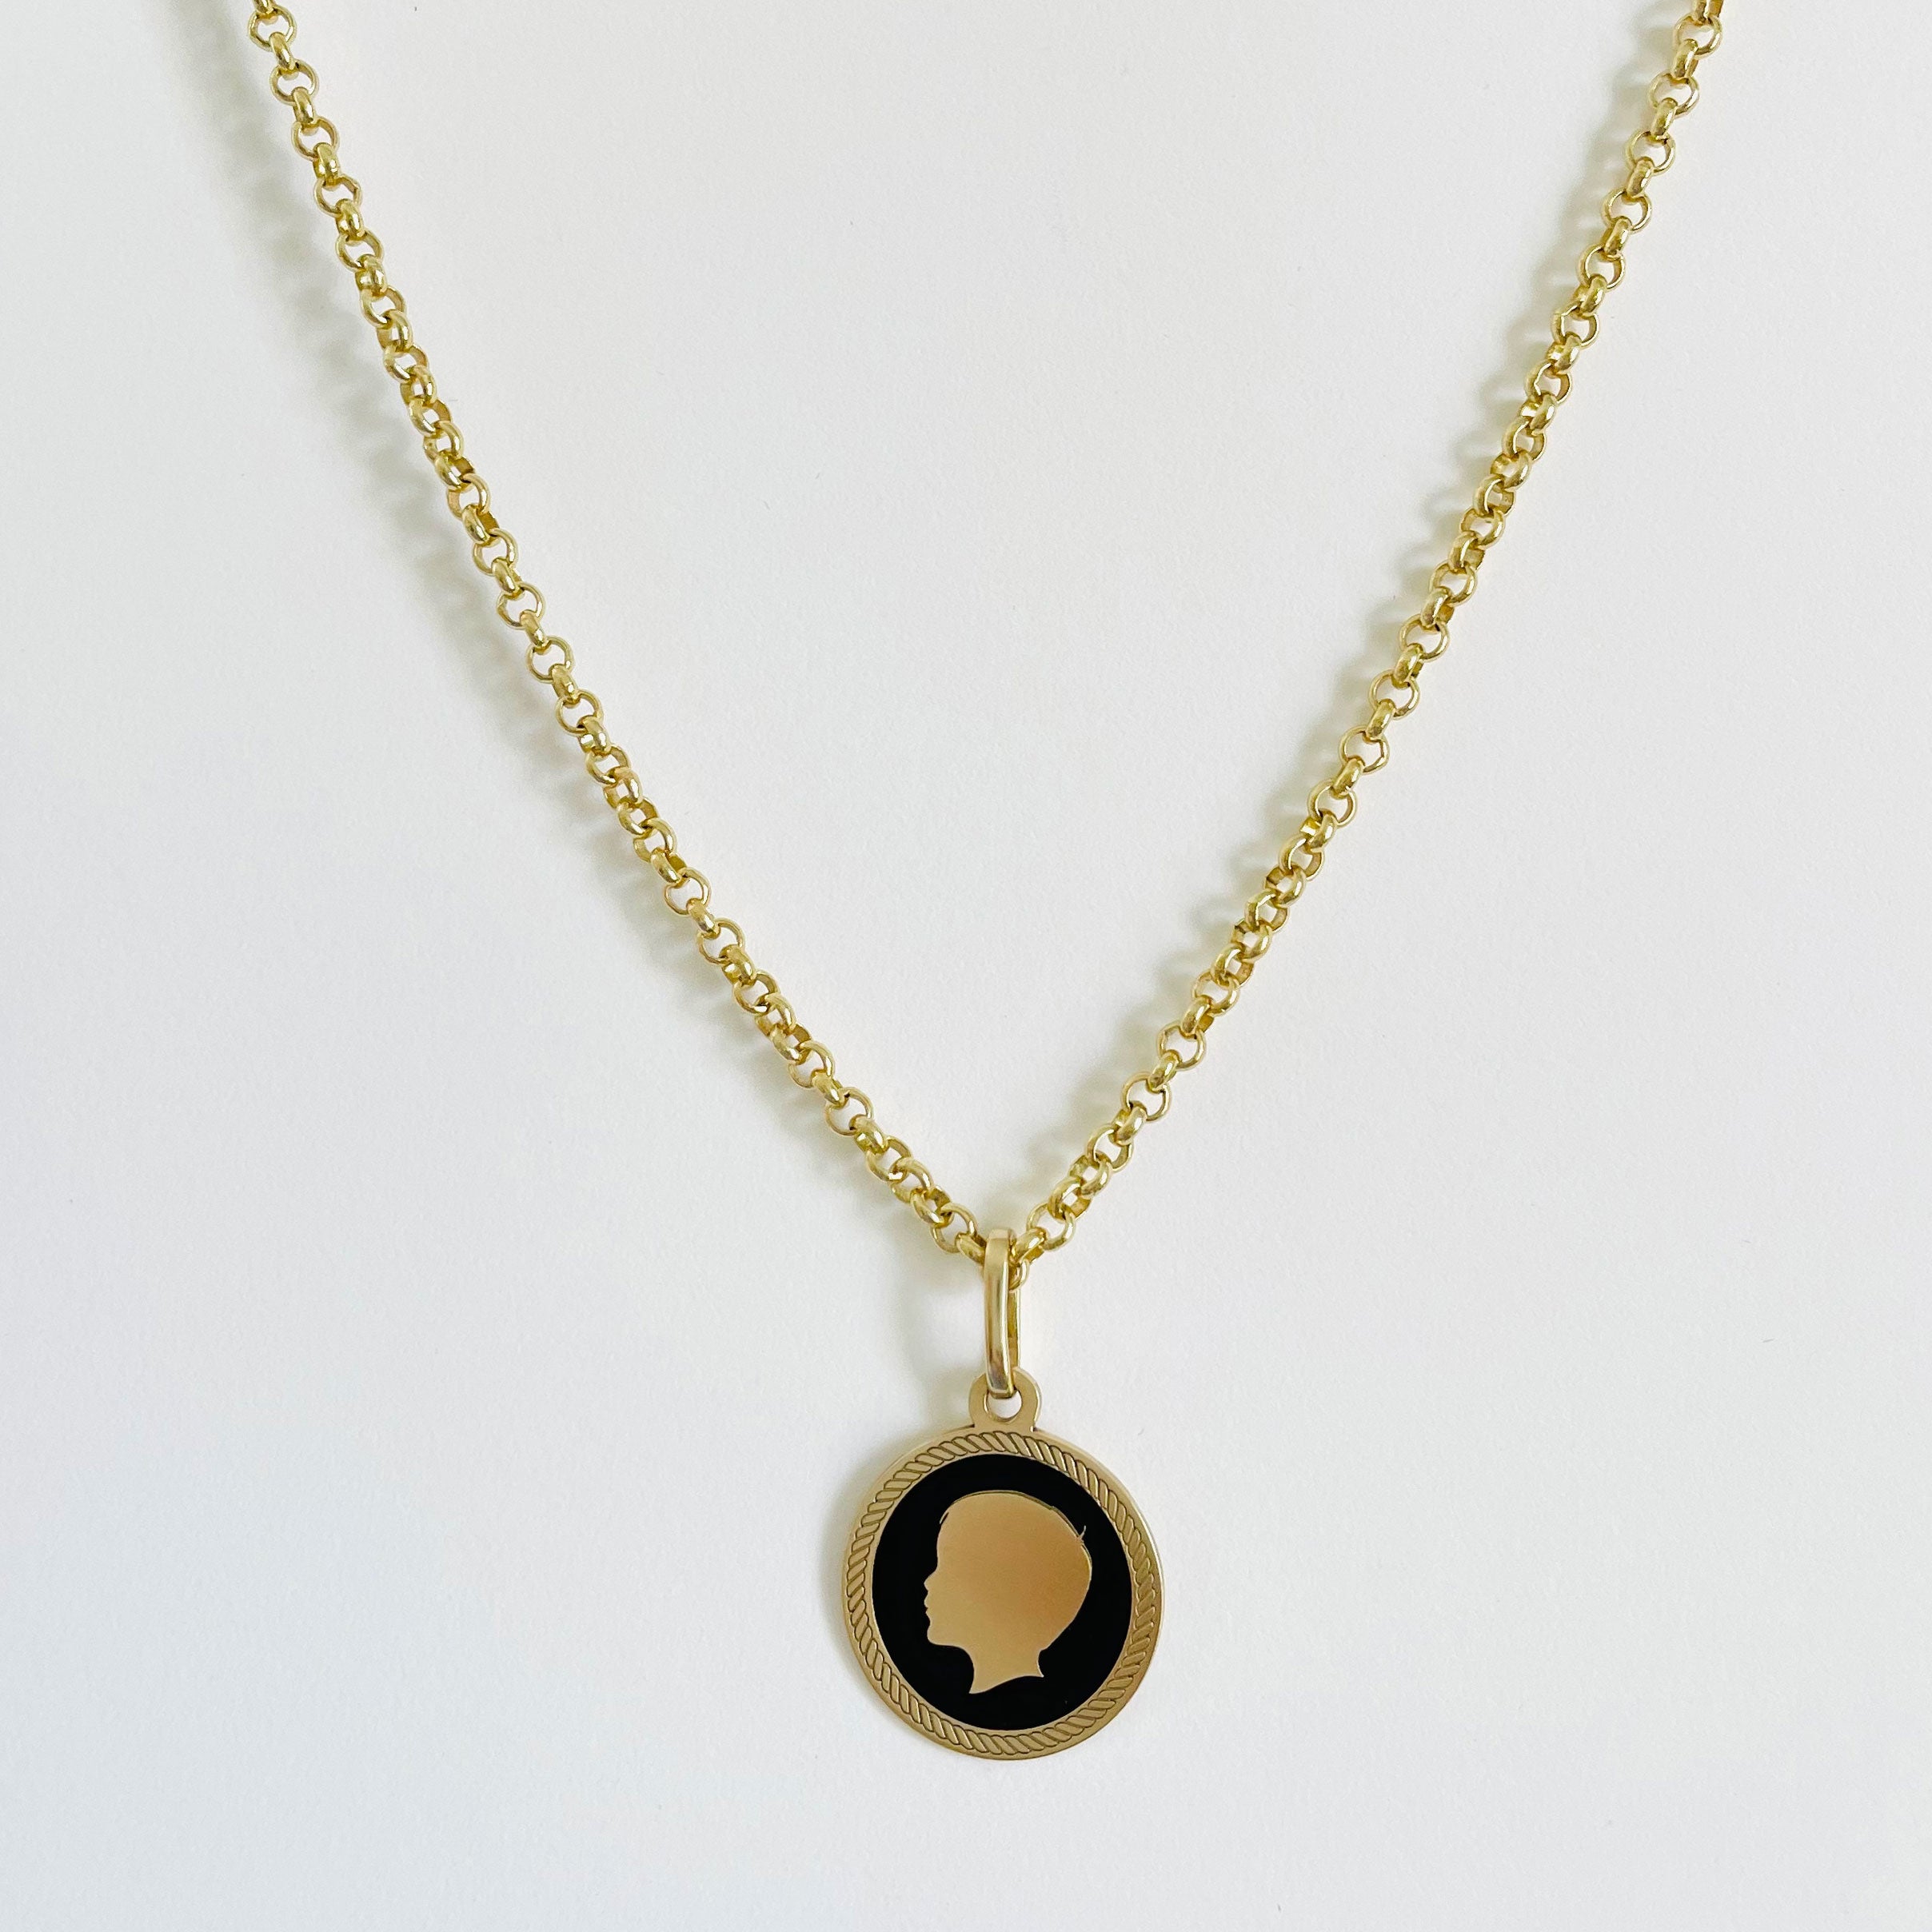 Gold Charm Necklace for Her with 2 Charm Holder Stations | Oval Rolo Link, Personalized Necklace | Wellesley Row 22